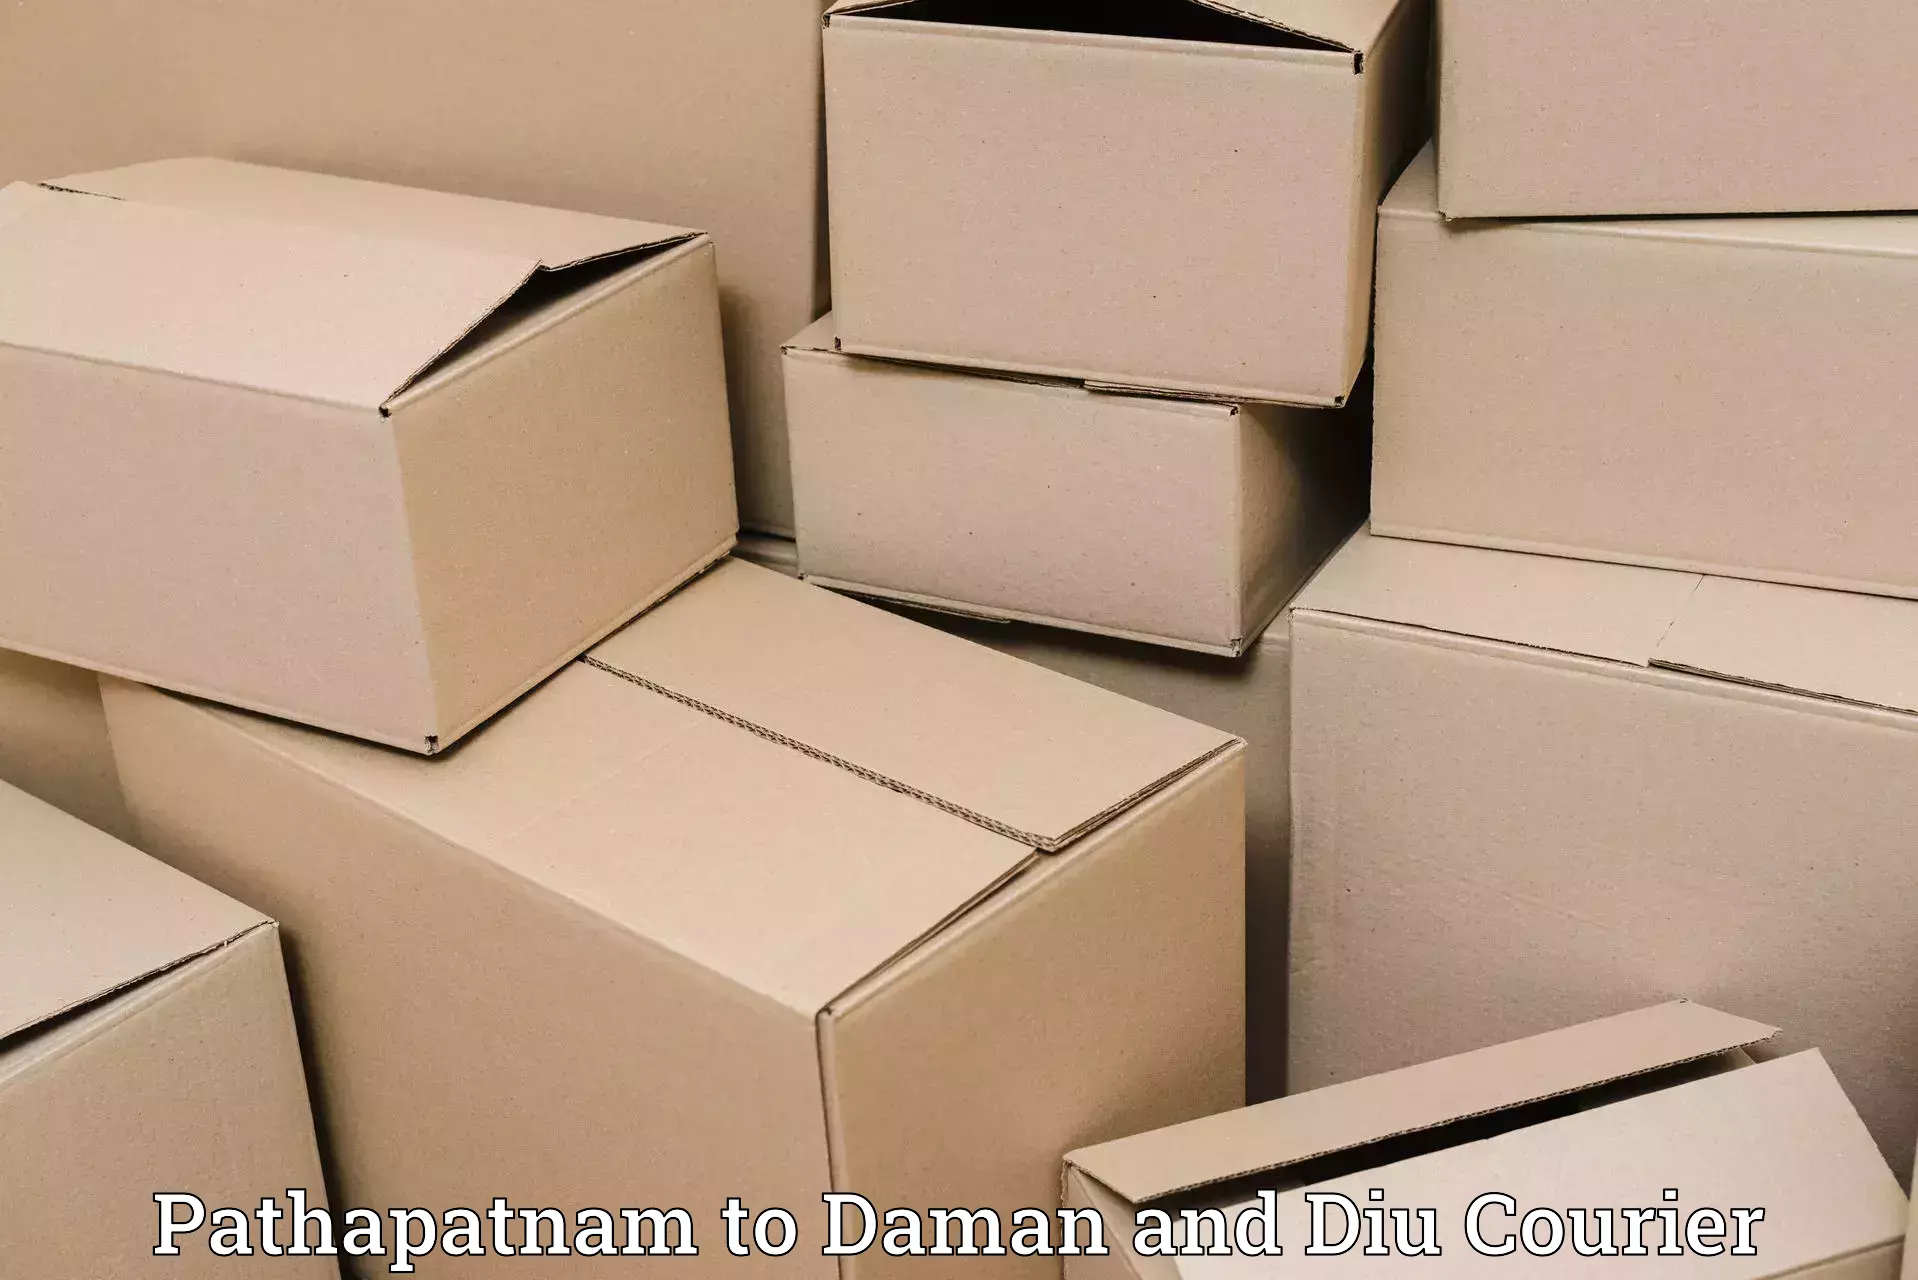 Efficient courier operations in Pathapatnam to Daman and Diu